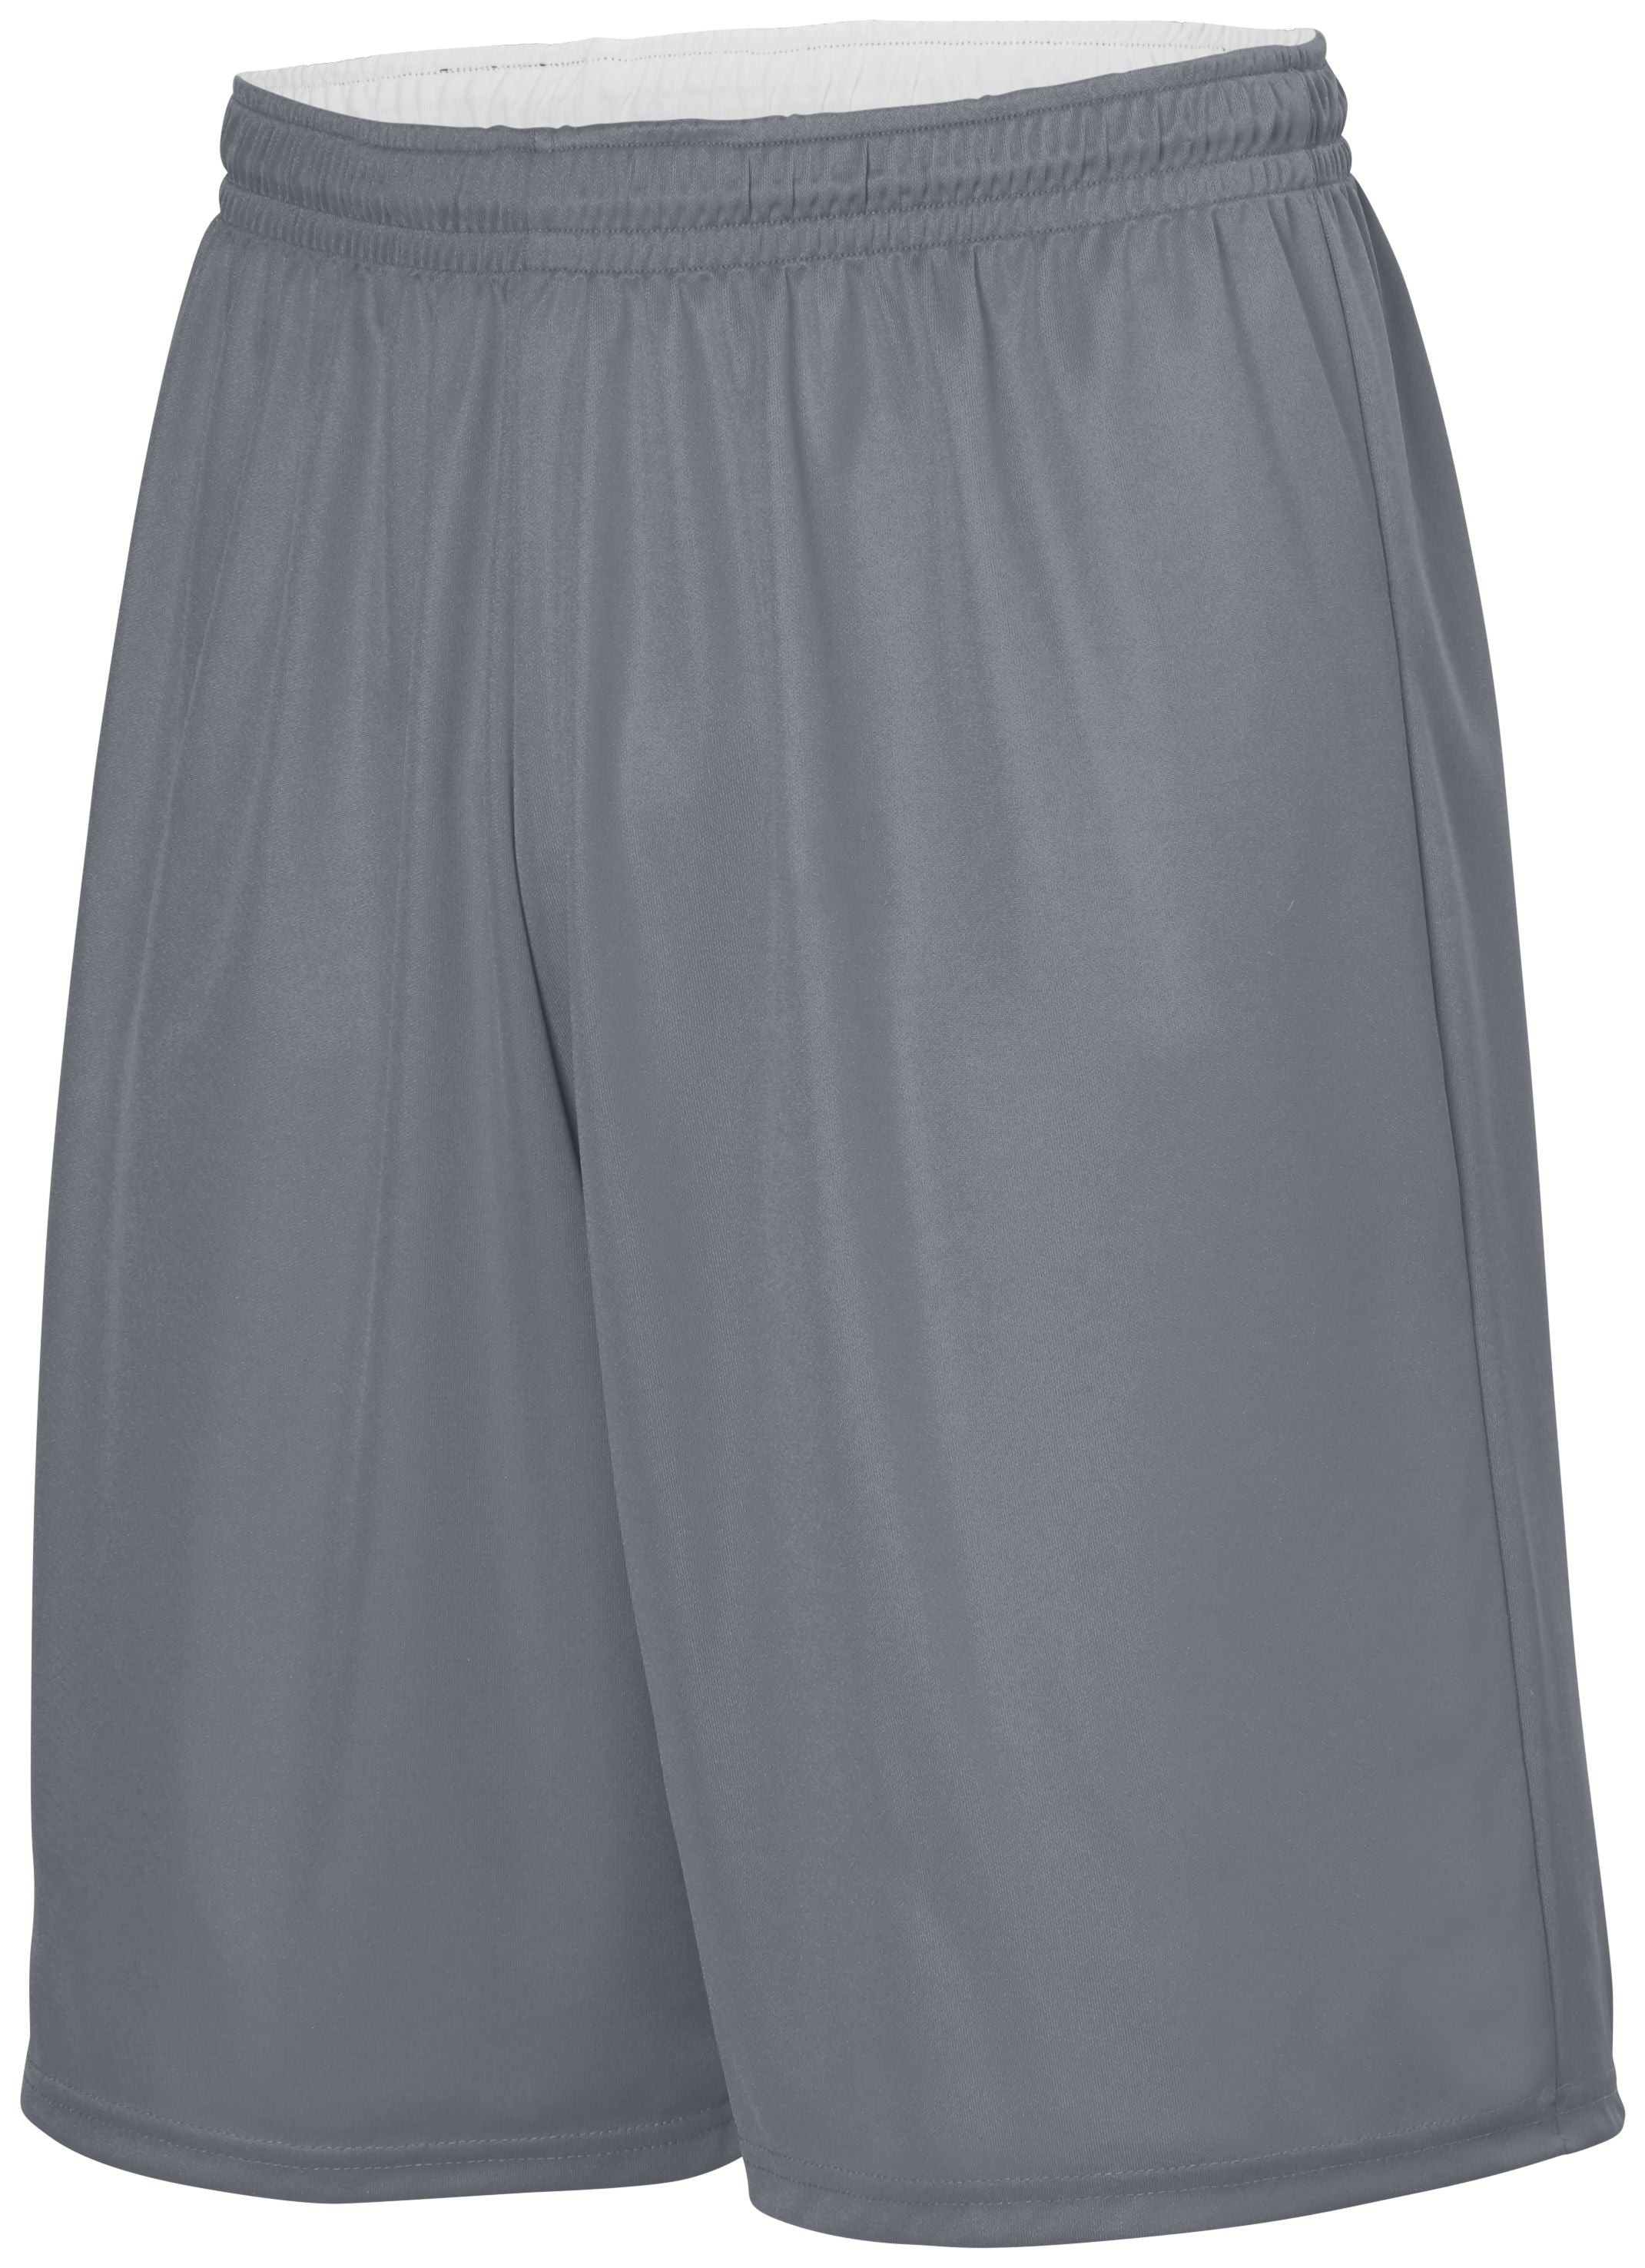 Youth Reversible Wicking Shorts 1407